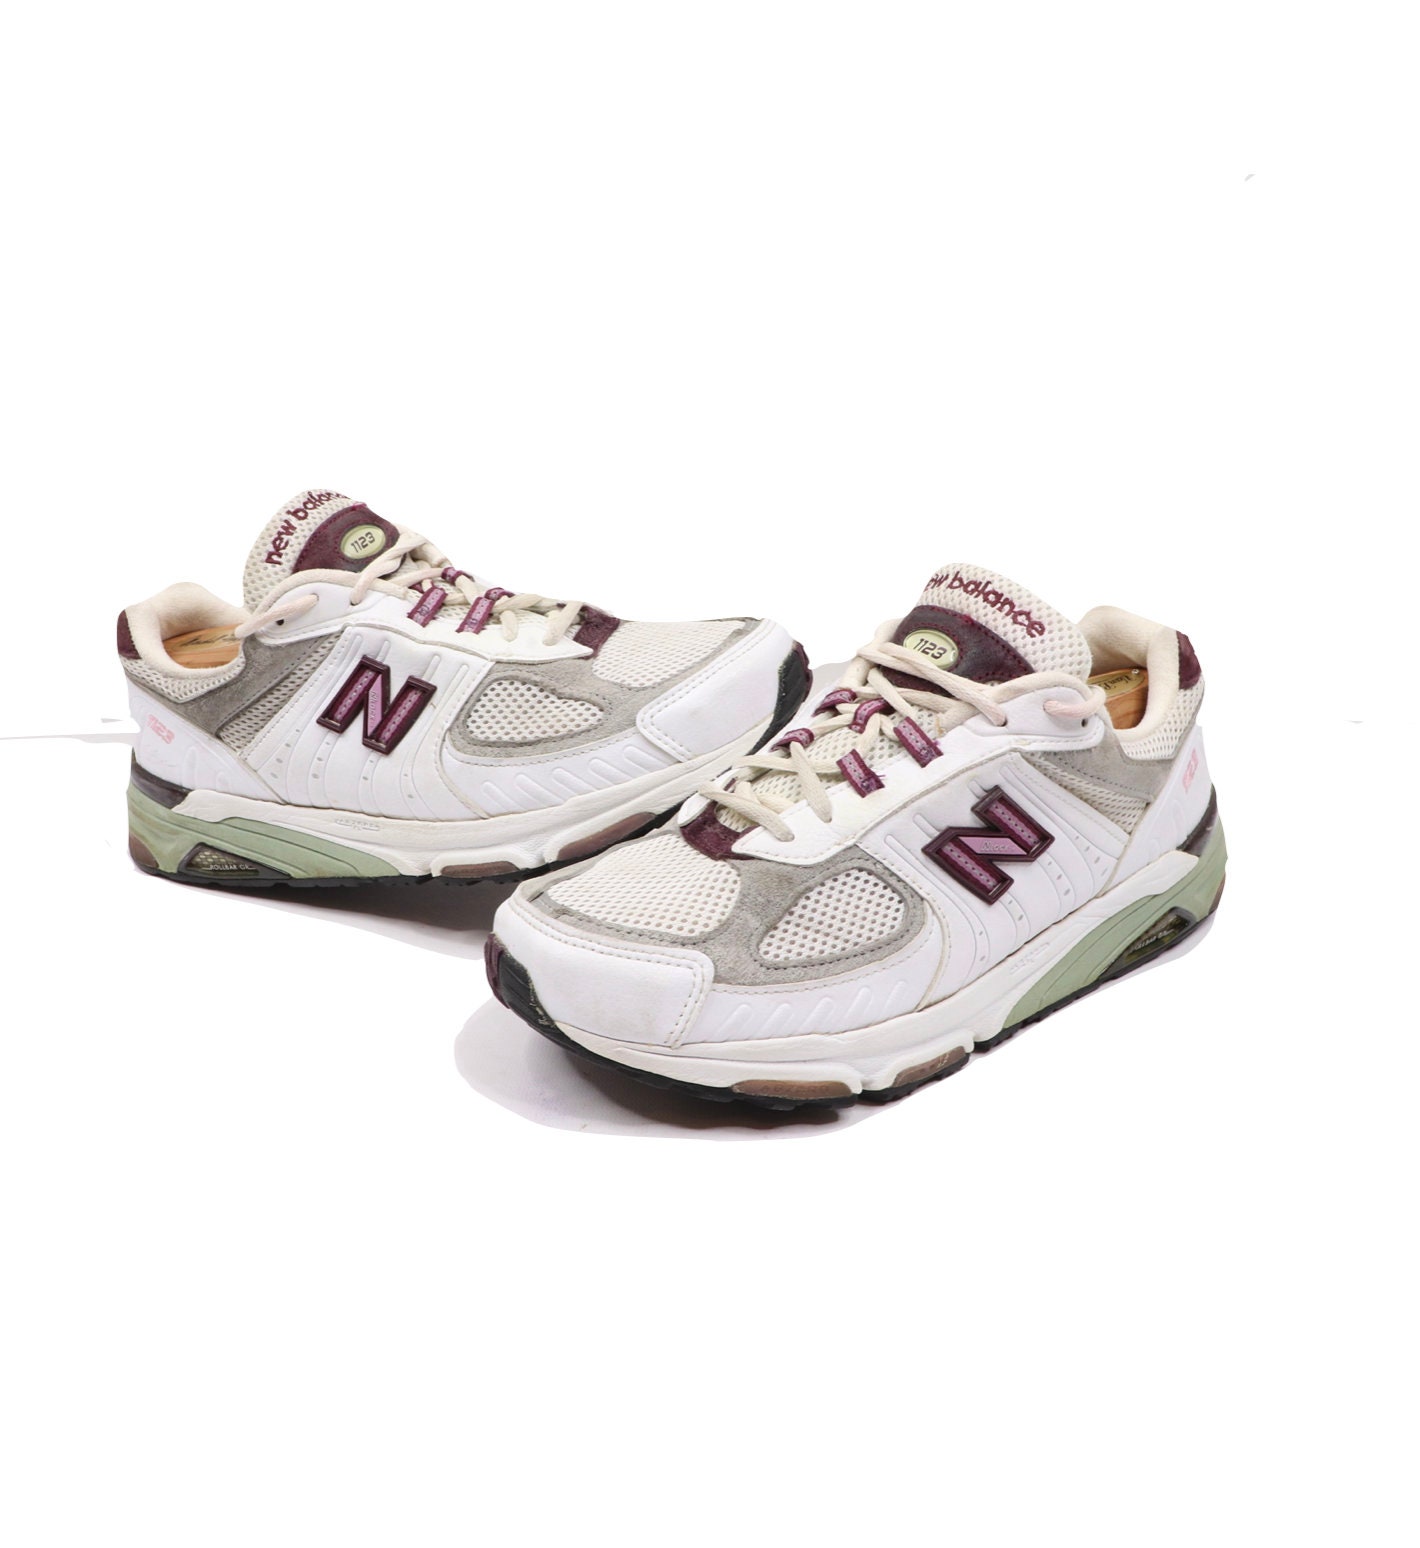 90s New Balance 1123 Spell Out Shoes Sneakers - Etsy